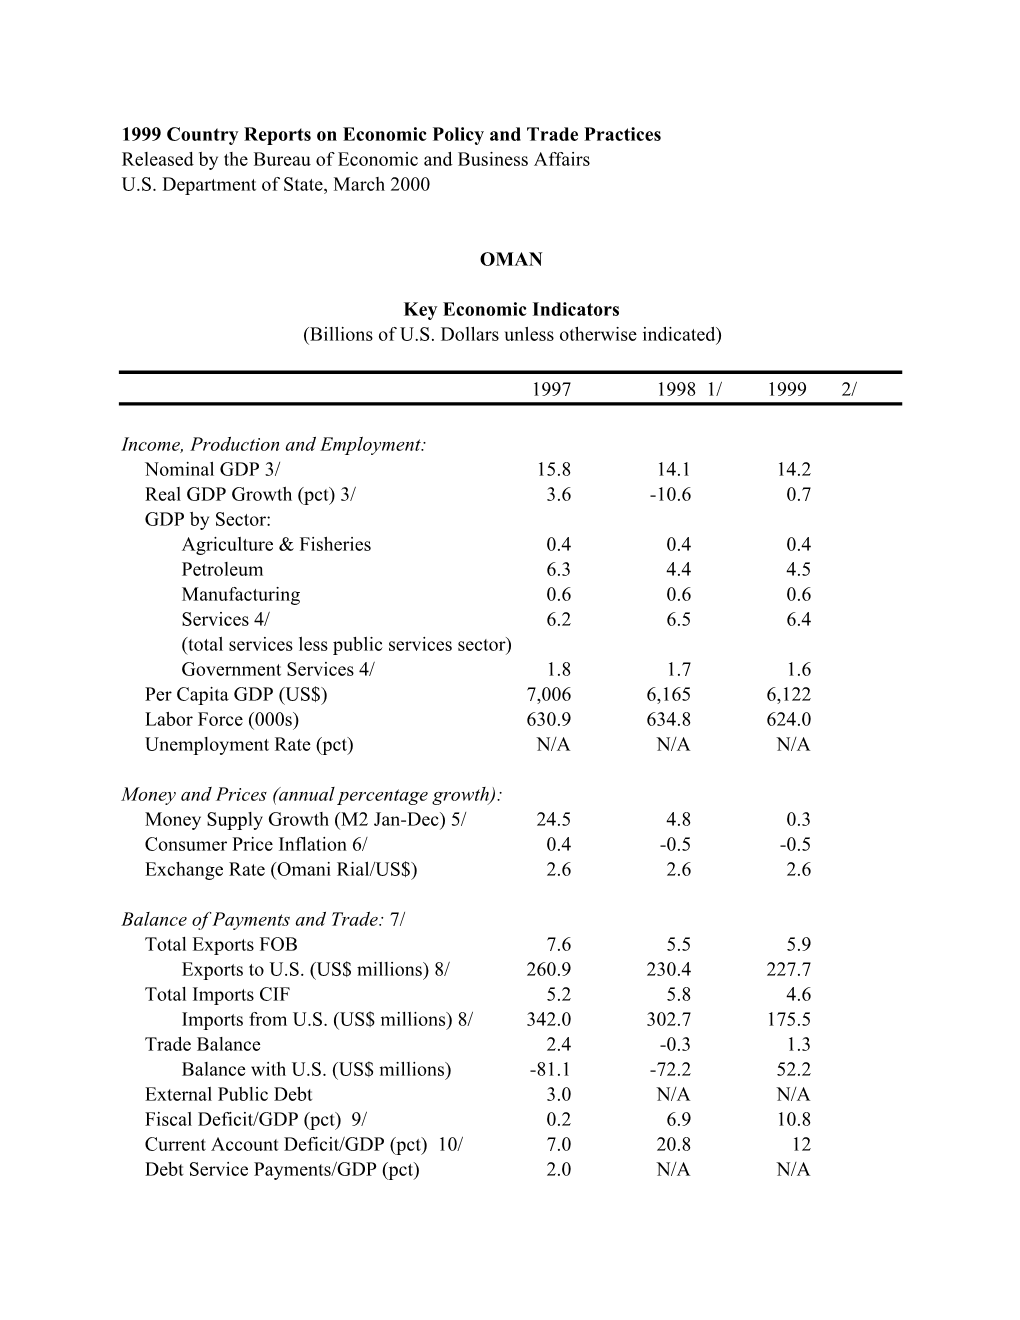 1999 Country Reports on Economic Policy and Trade Practices Released by the Bureau of Economic and Business Affairs U.S